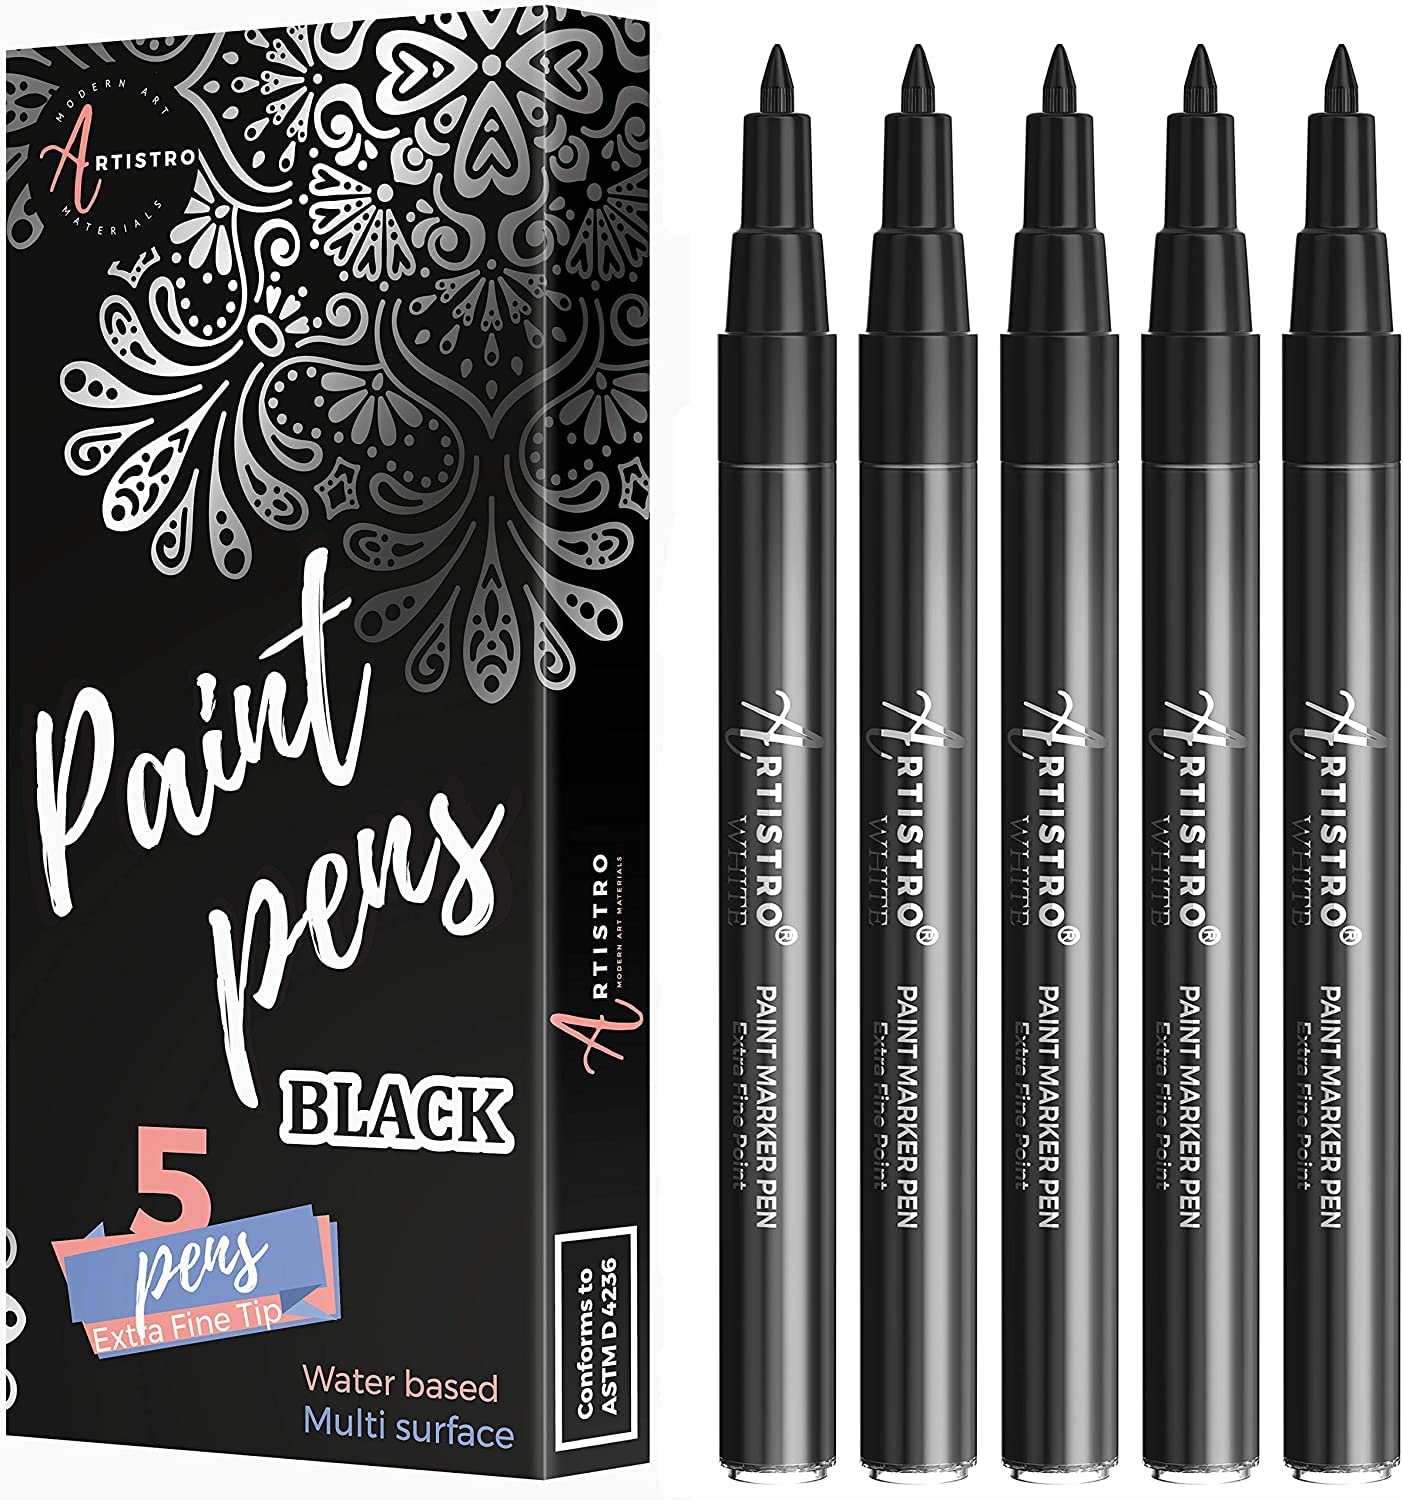 ARTISTRO Black Paint Pens for Rock Painting Stone Ceramic Glass Wood Tire  Fabric Metal Canvas. Set of 5 Water Based Black Markers for Acrylic Painting  Extra Fine Point Tip 5 Black Extra-Fine